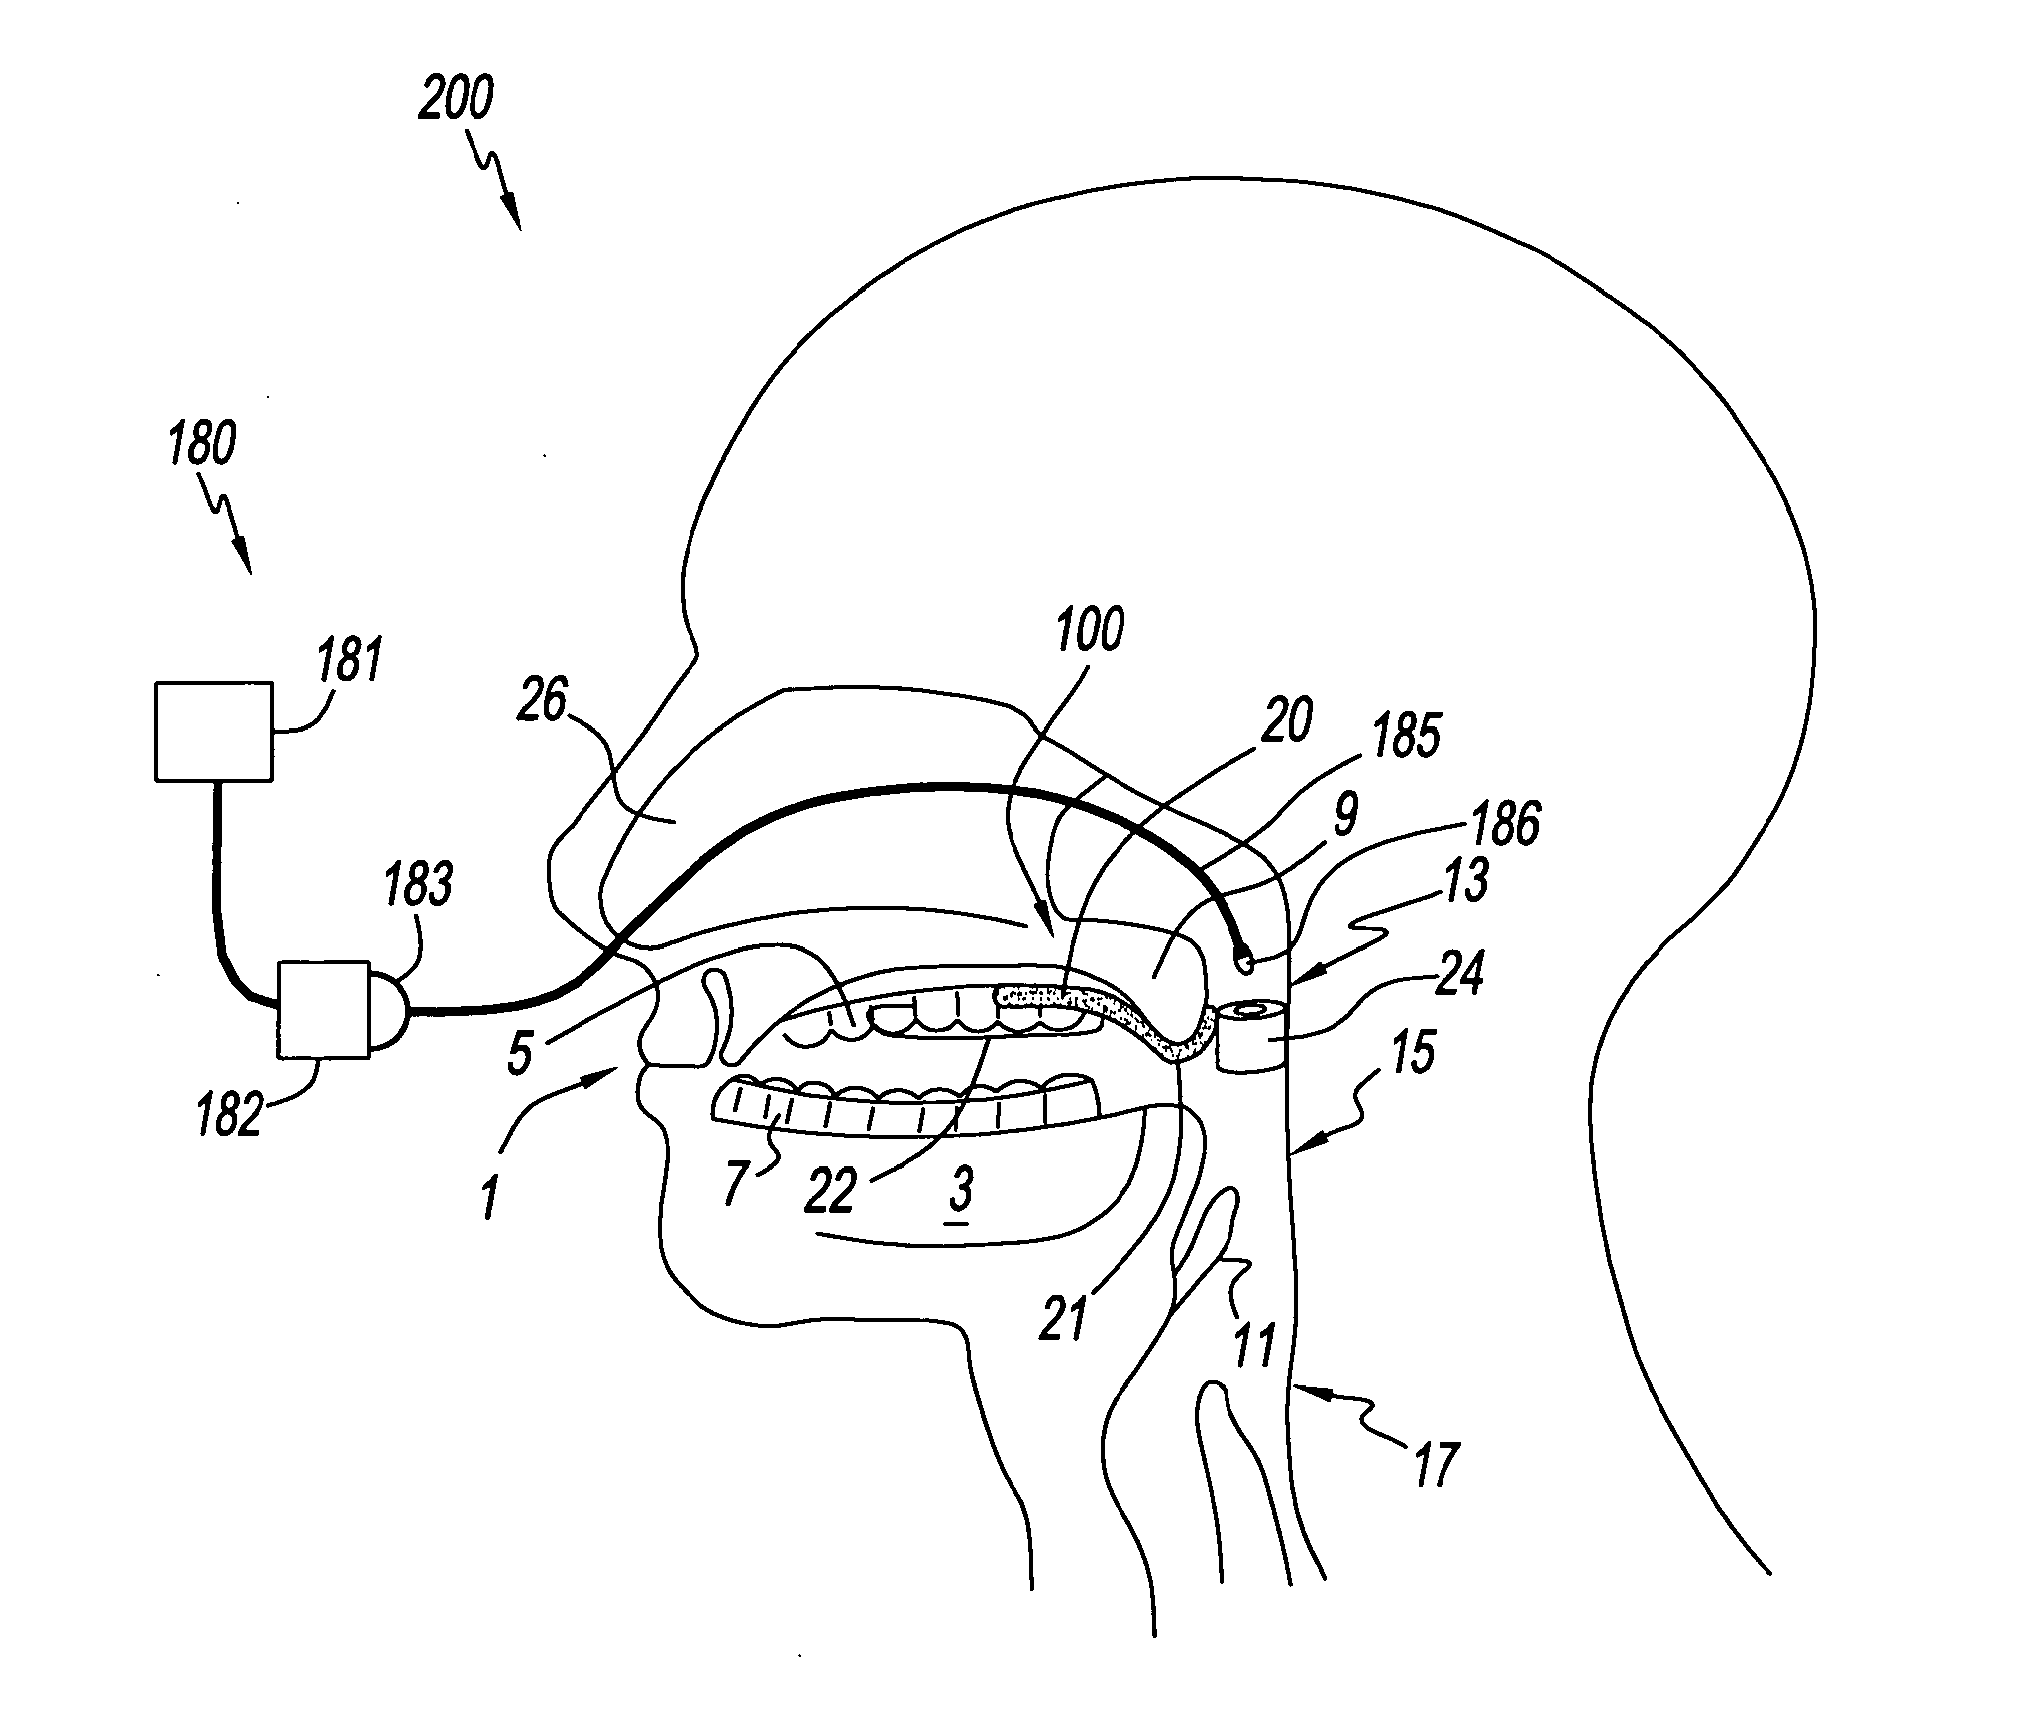 A palate retainer with attached nasopharyngeal airway extender for use in the treatment of obstructive sleep apnea